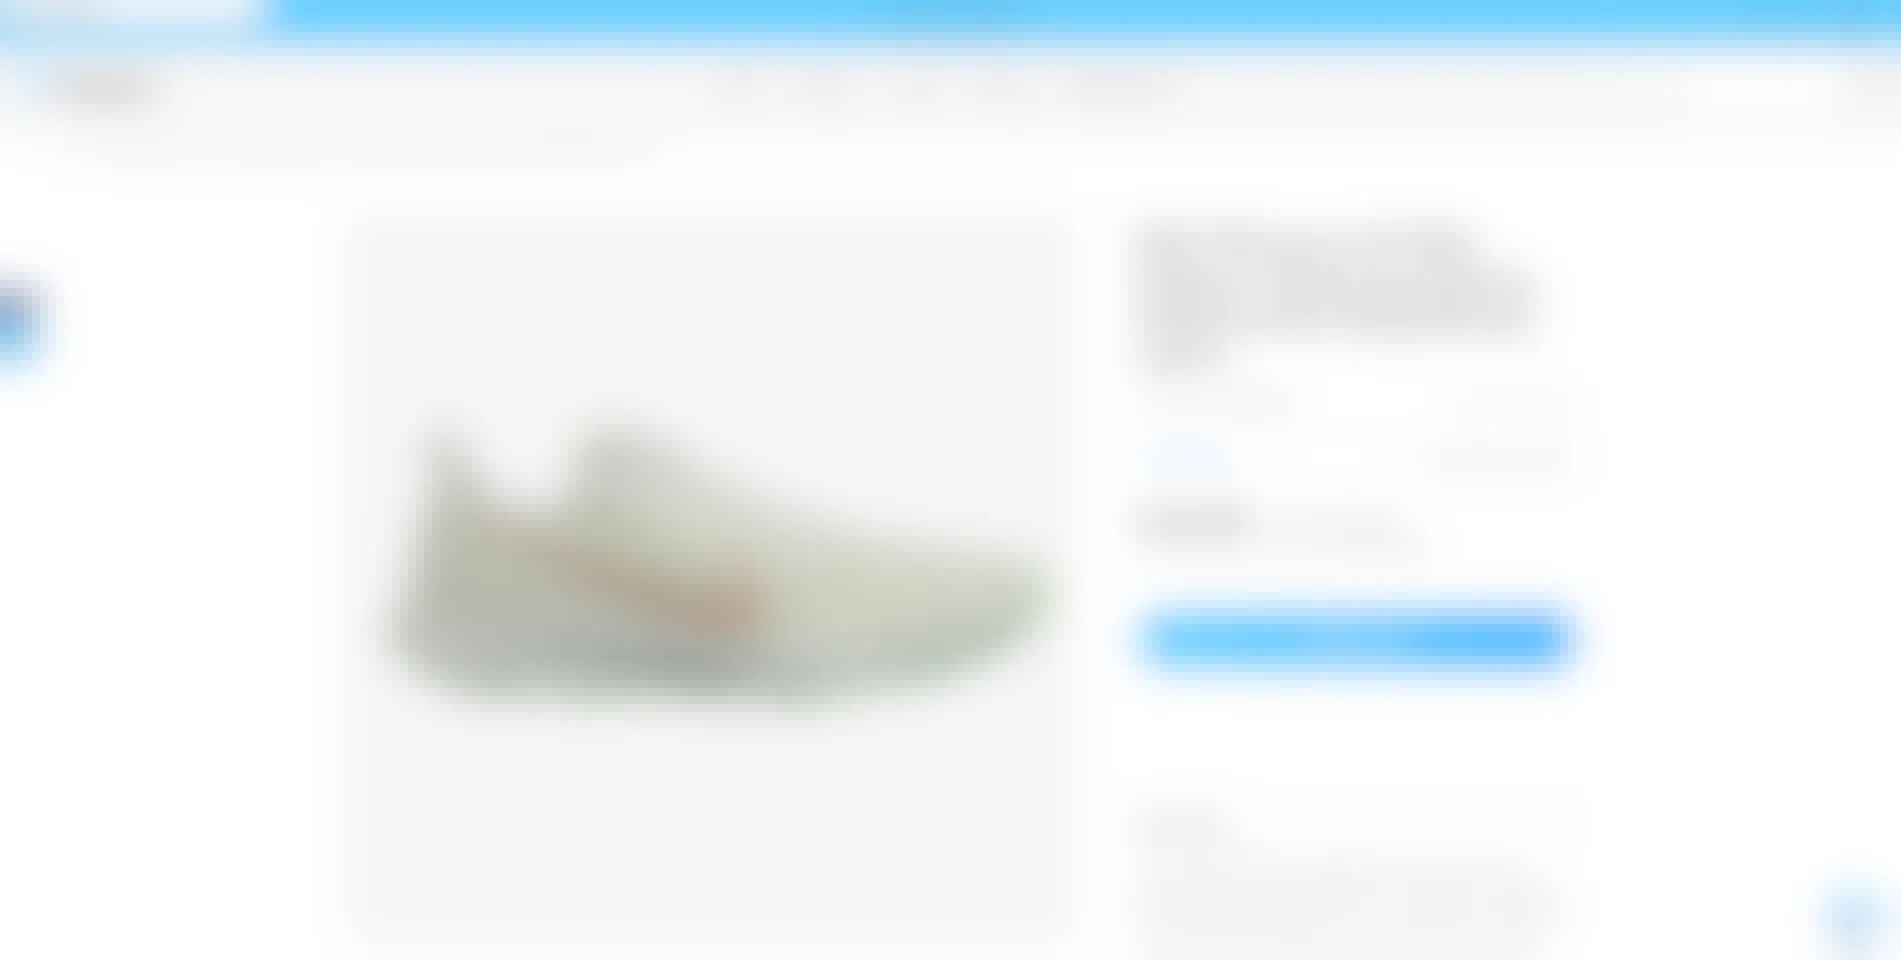 A Nike running shoe on the homepage of Proozy website.